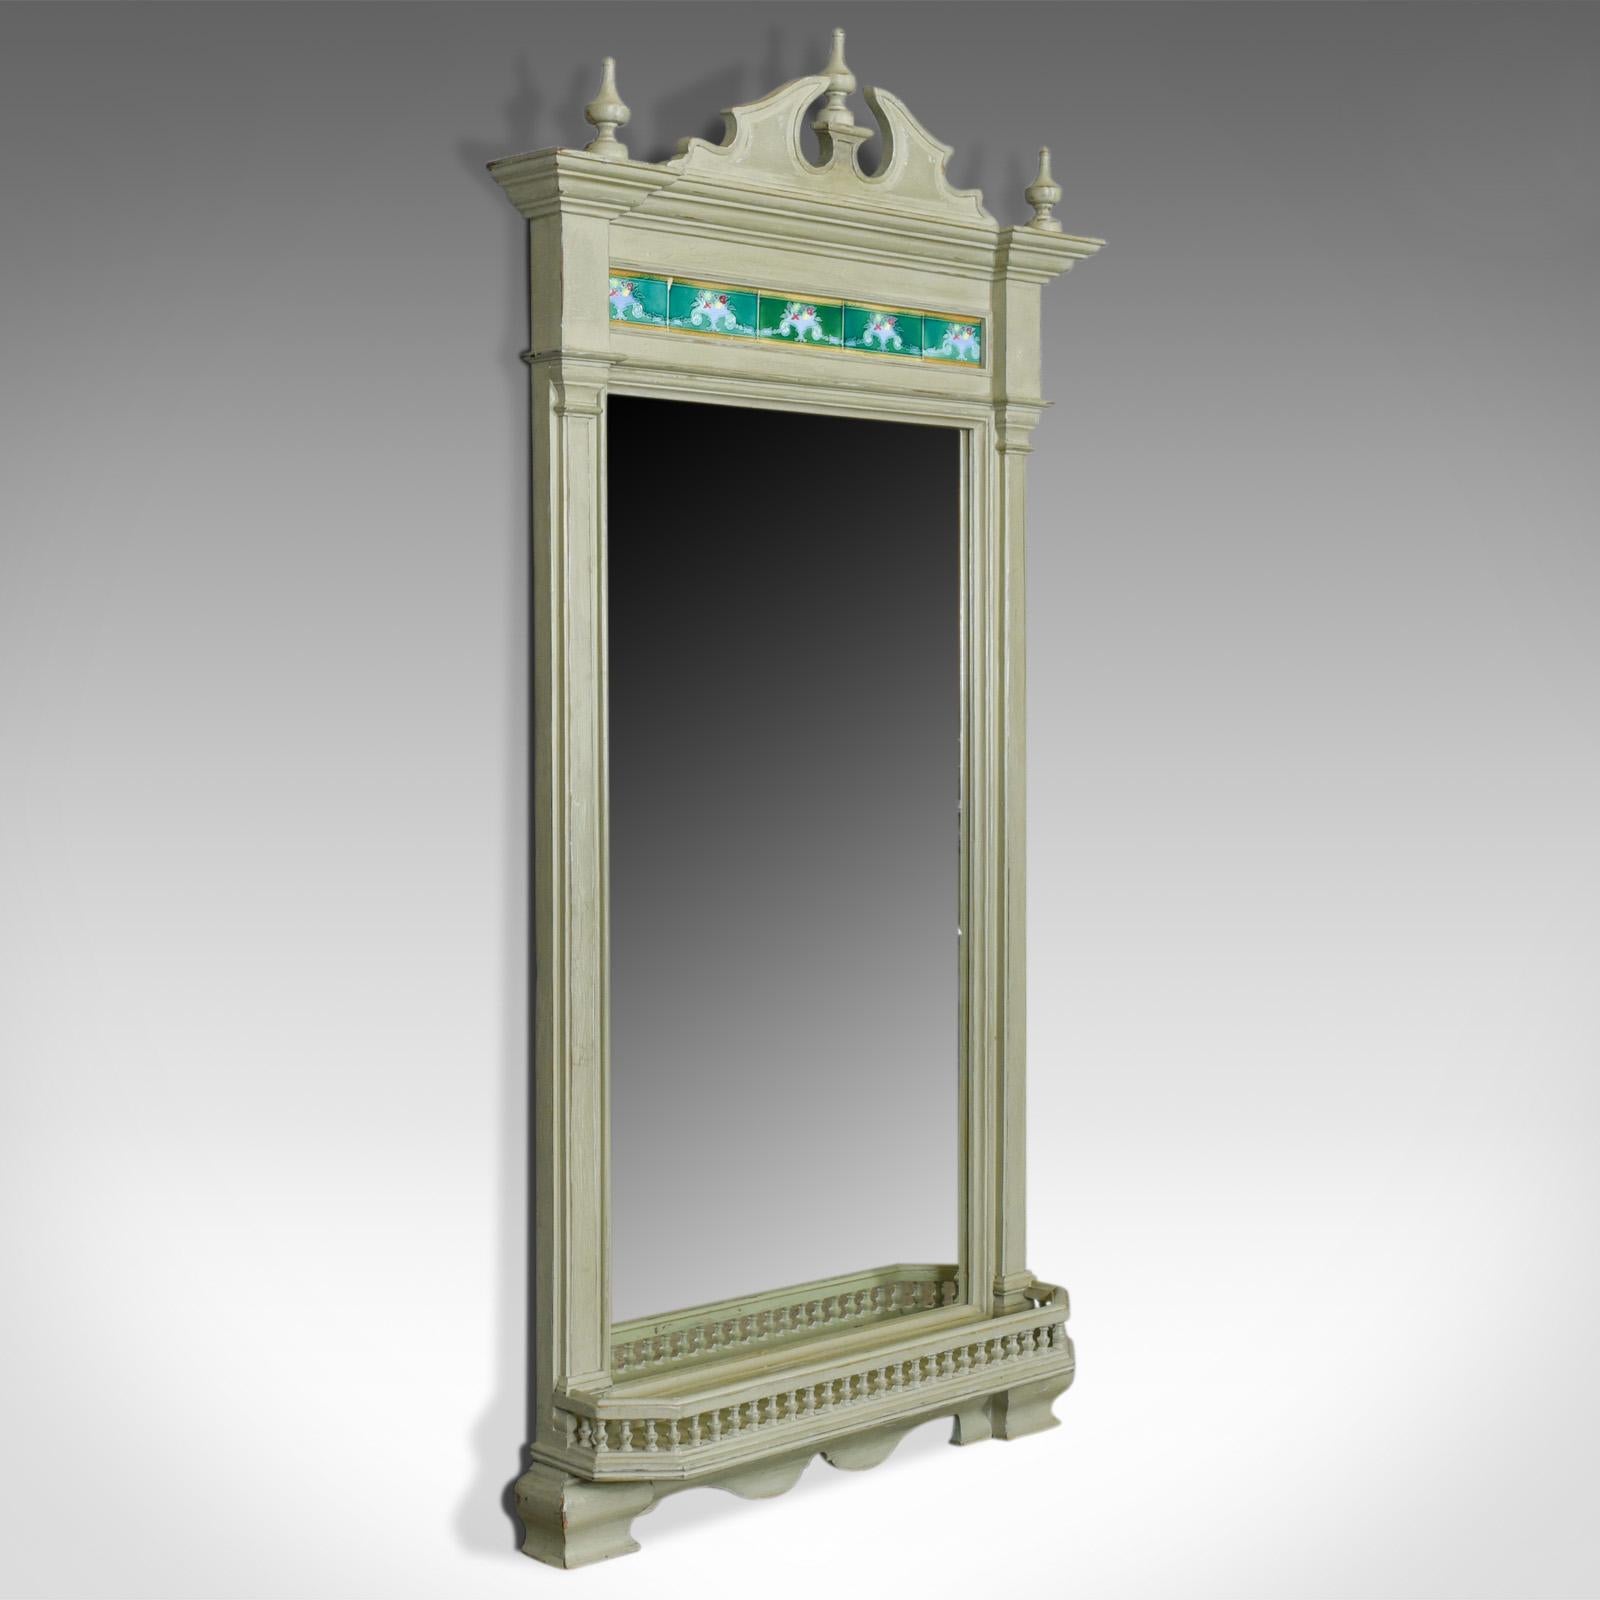 This is a large, painted antique wall mirror, an English, Victorian overmantel or pier mirror with tiles and gallery, dating to the late 19th century, circa 1890.

A super decorative mirror with a pale sage green finish
Displaying classical